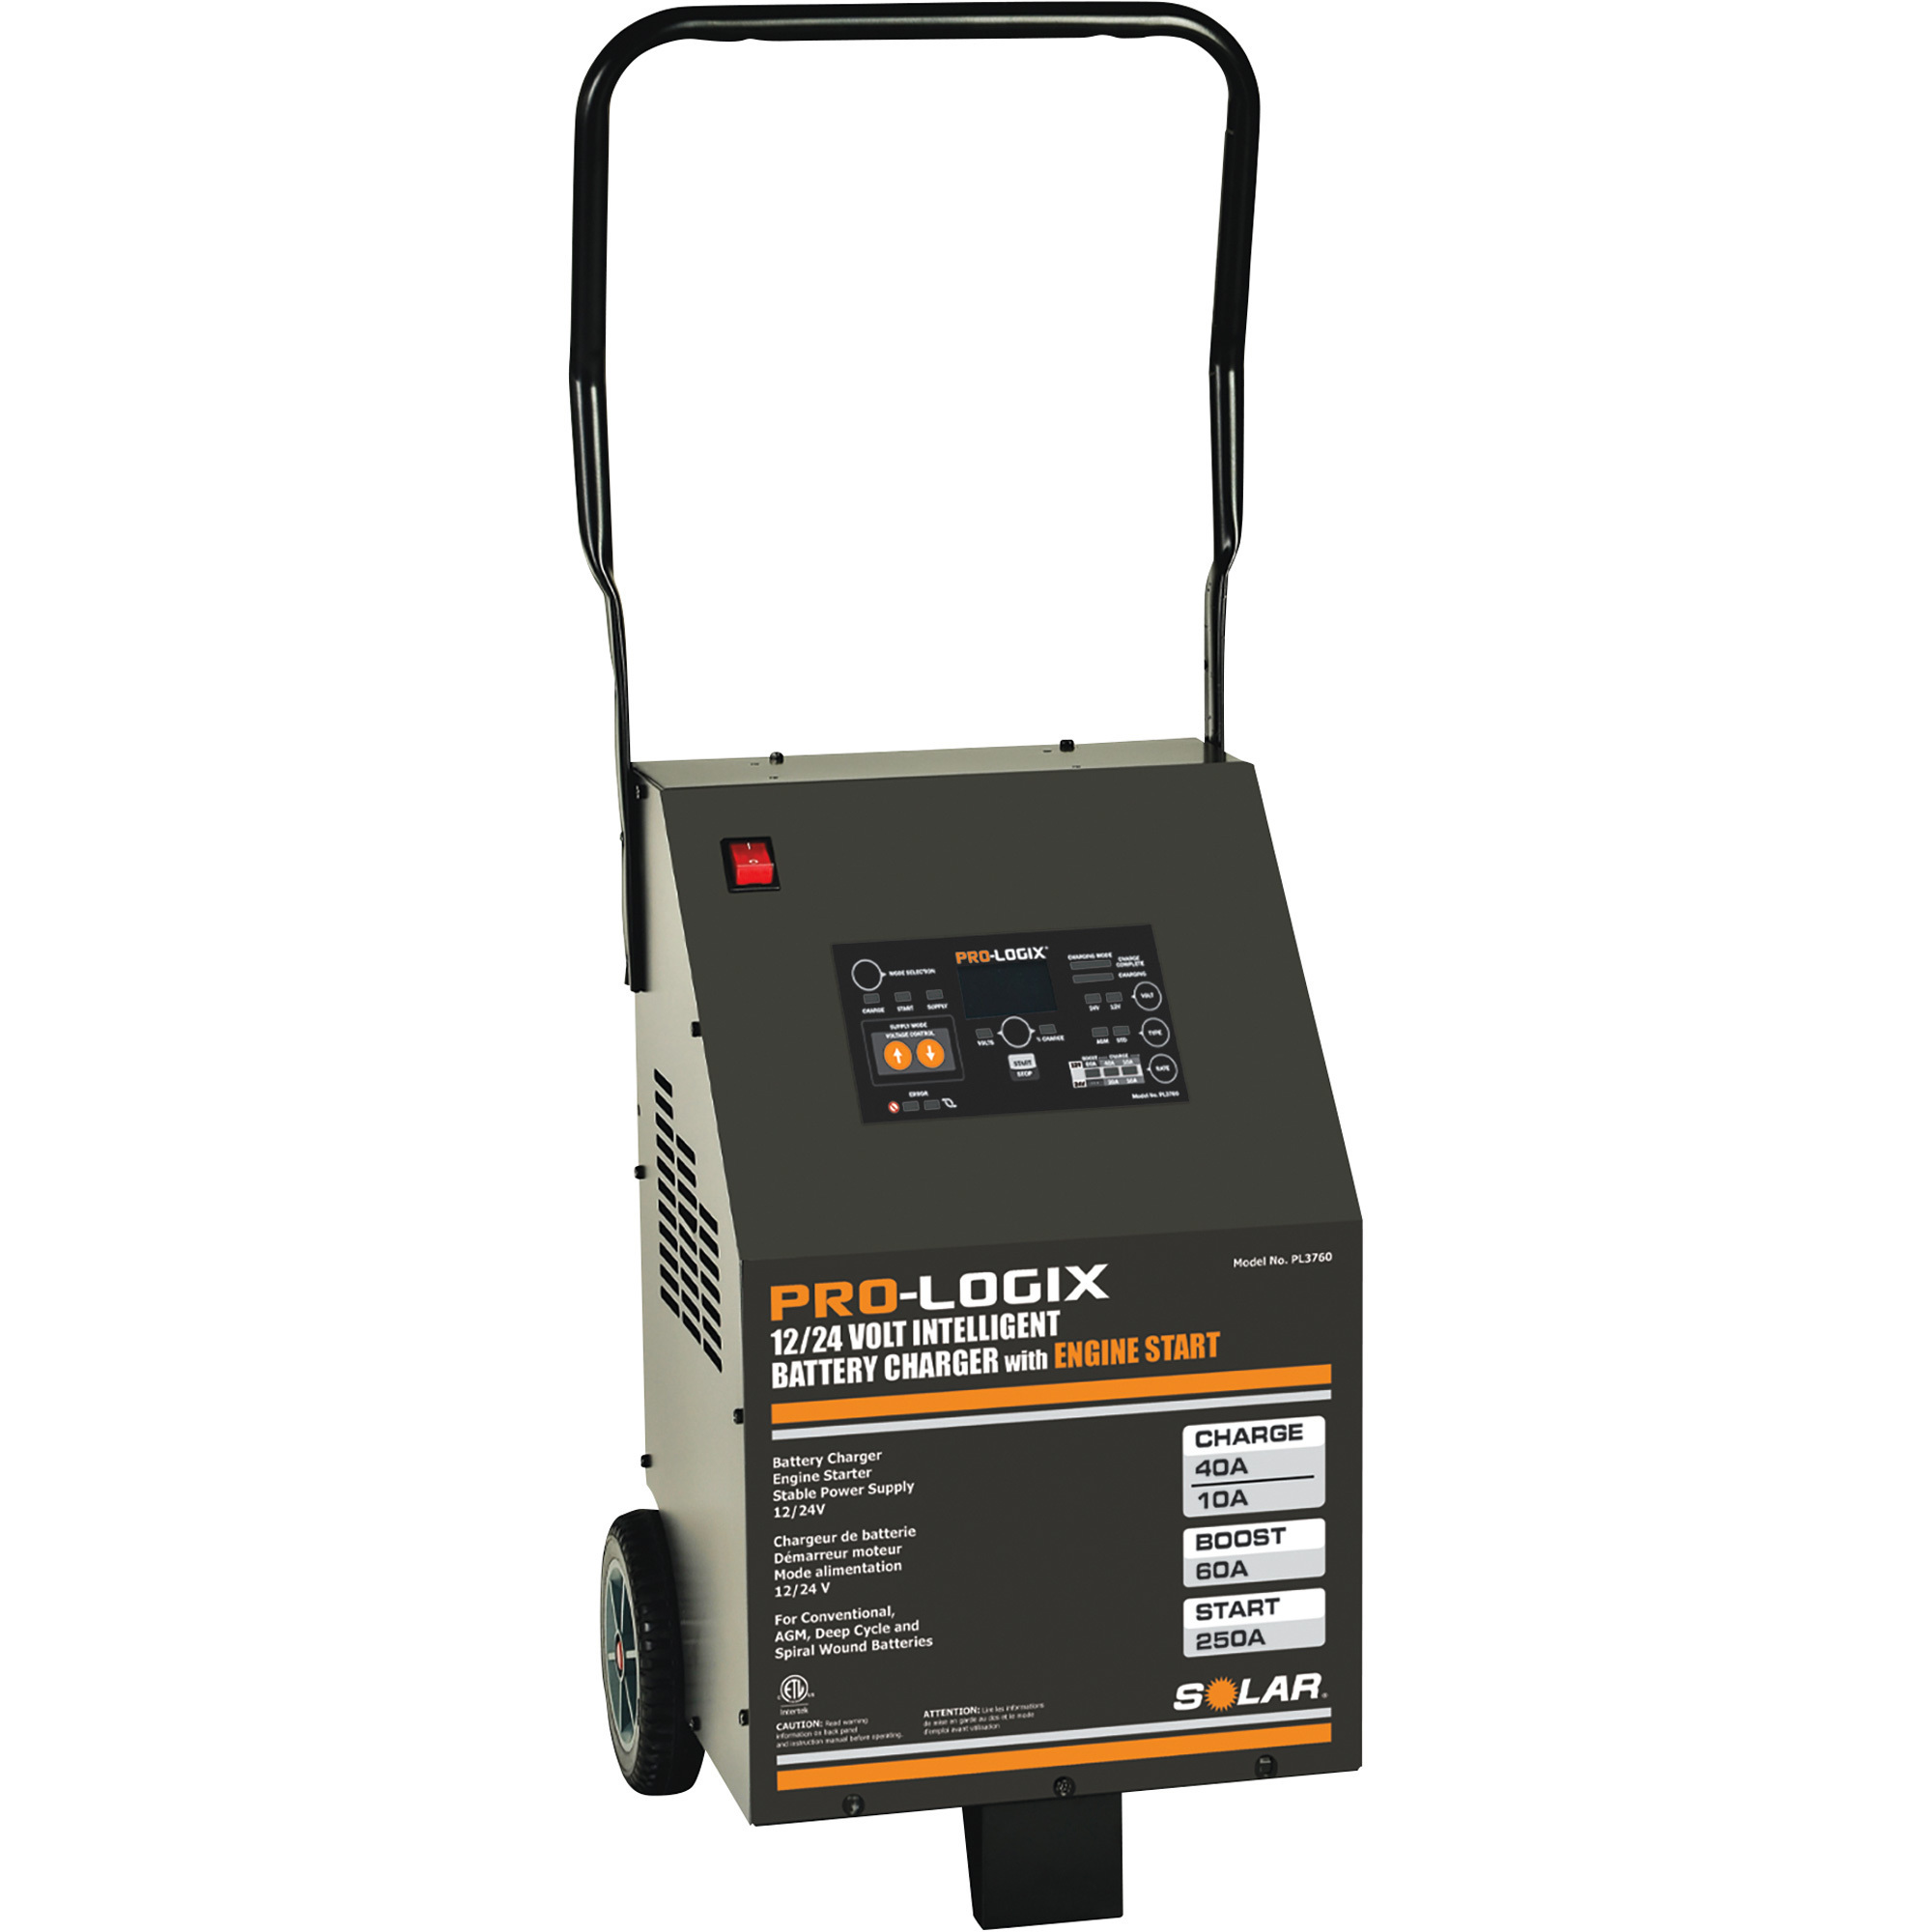 Pro-Logix Intelligent Wheeled Battery Charger with Engine Start, 12/24 Volts, 60/40/10/250 Amps, Model PL3760